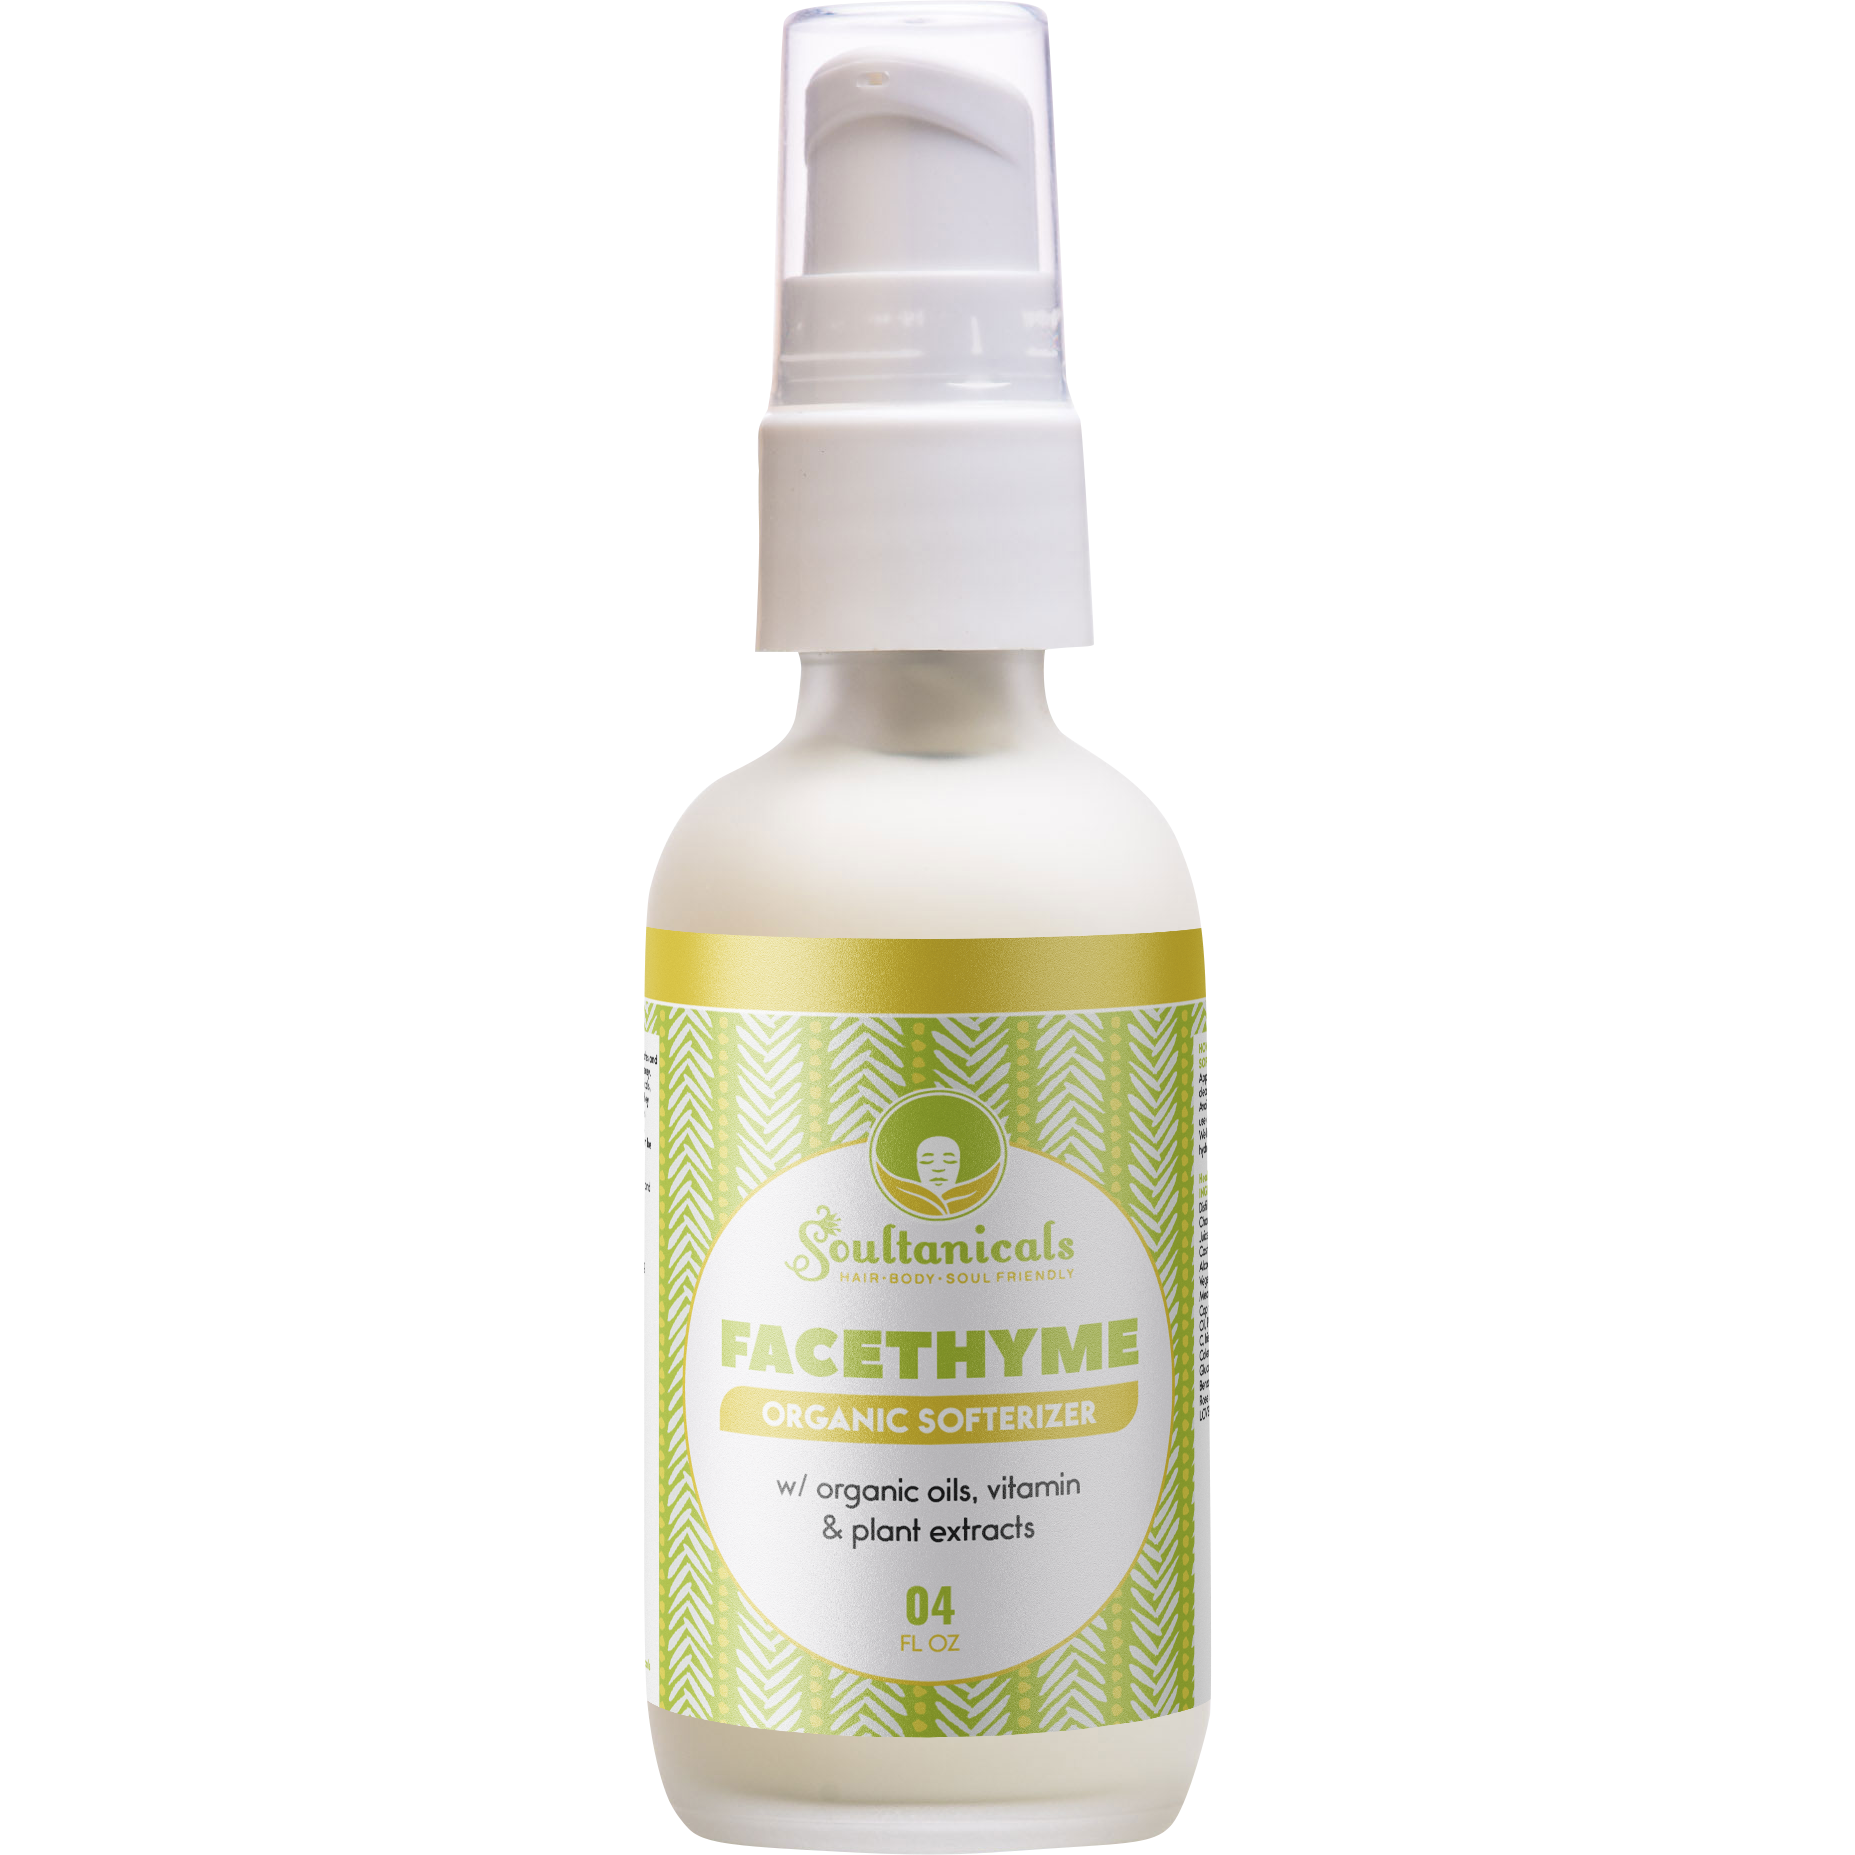 FaceThyme, Organic Softerizer